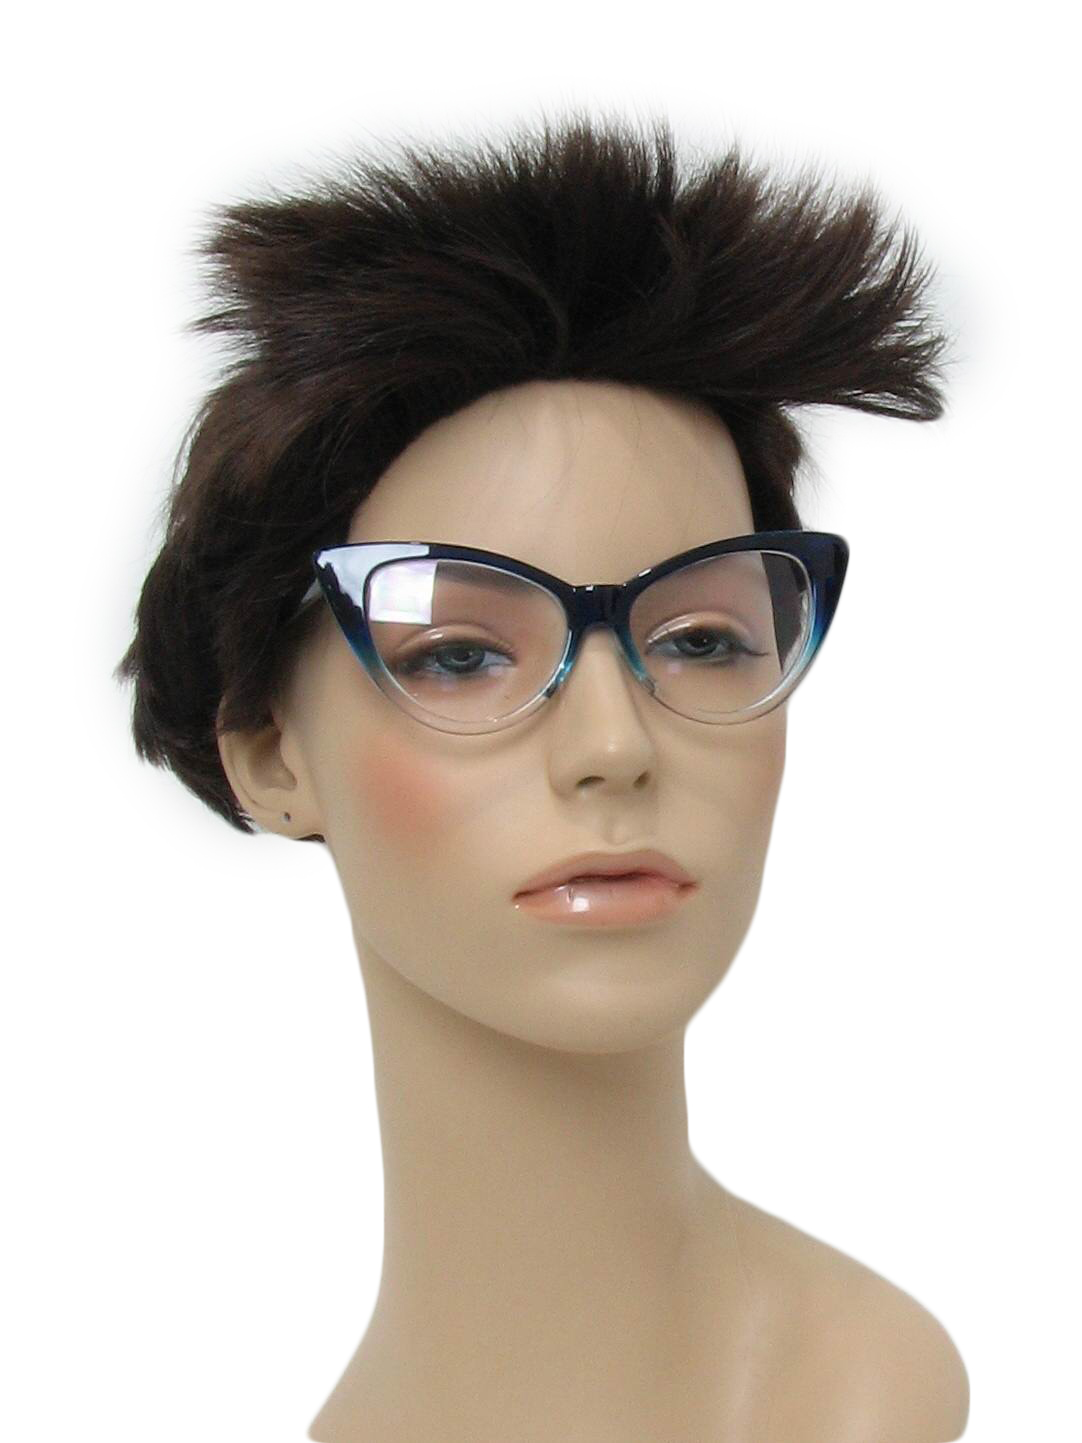 Retro 50s Glasses: 50s Style (made recently) -No Label- Womens dark ...